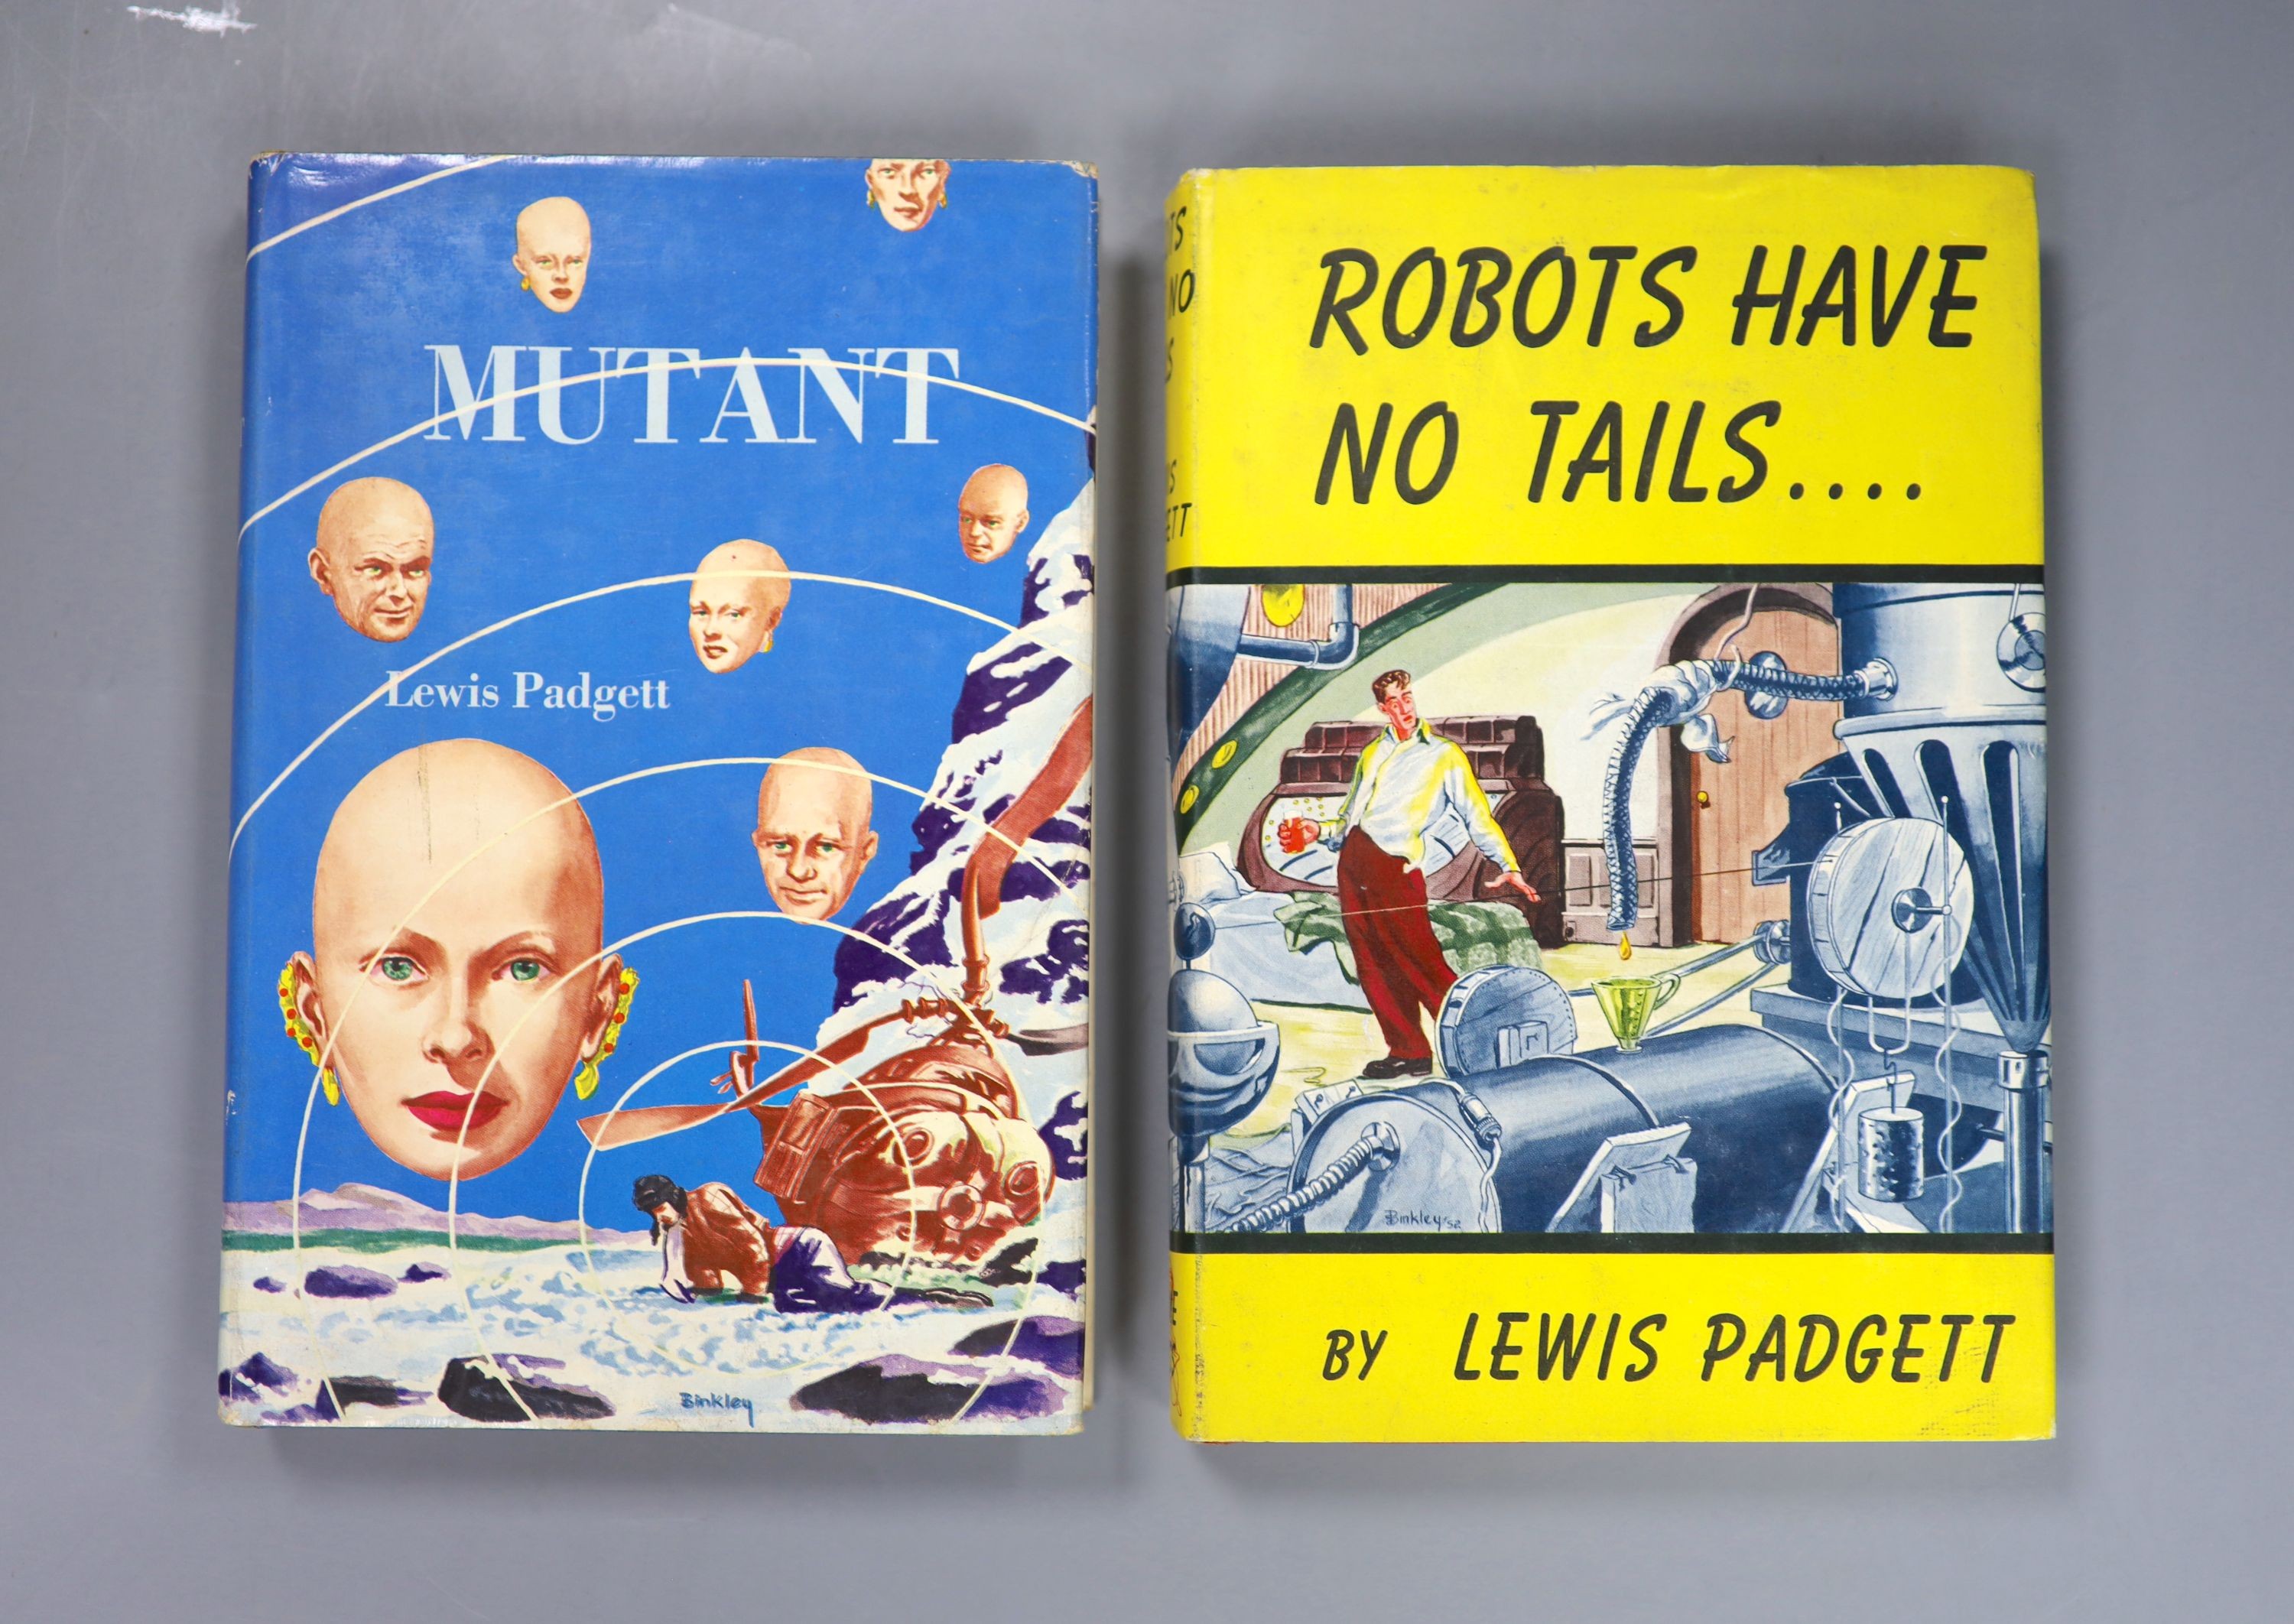 Padgett, Lewis - Robots Have No Tails, 1st edition, with d/j, Gnome Press, New York, 1952 and - Mutant, 1st edition, with d/j, Gnome Press, New York, 1953 (2)